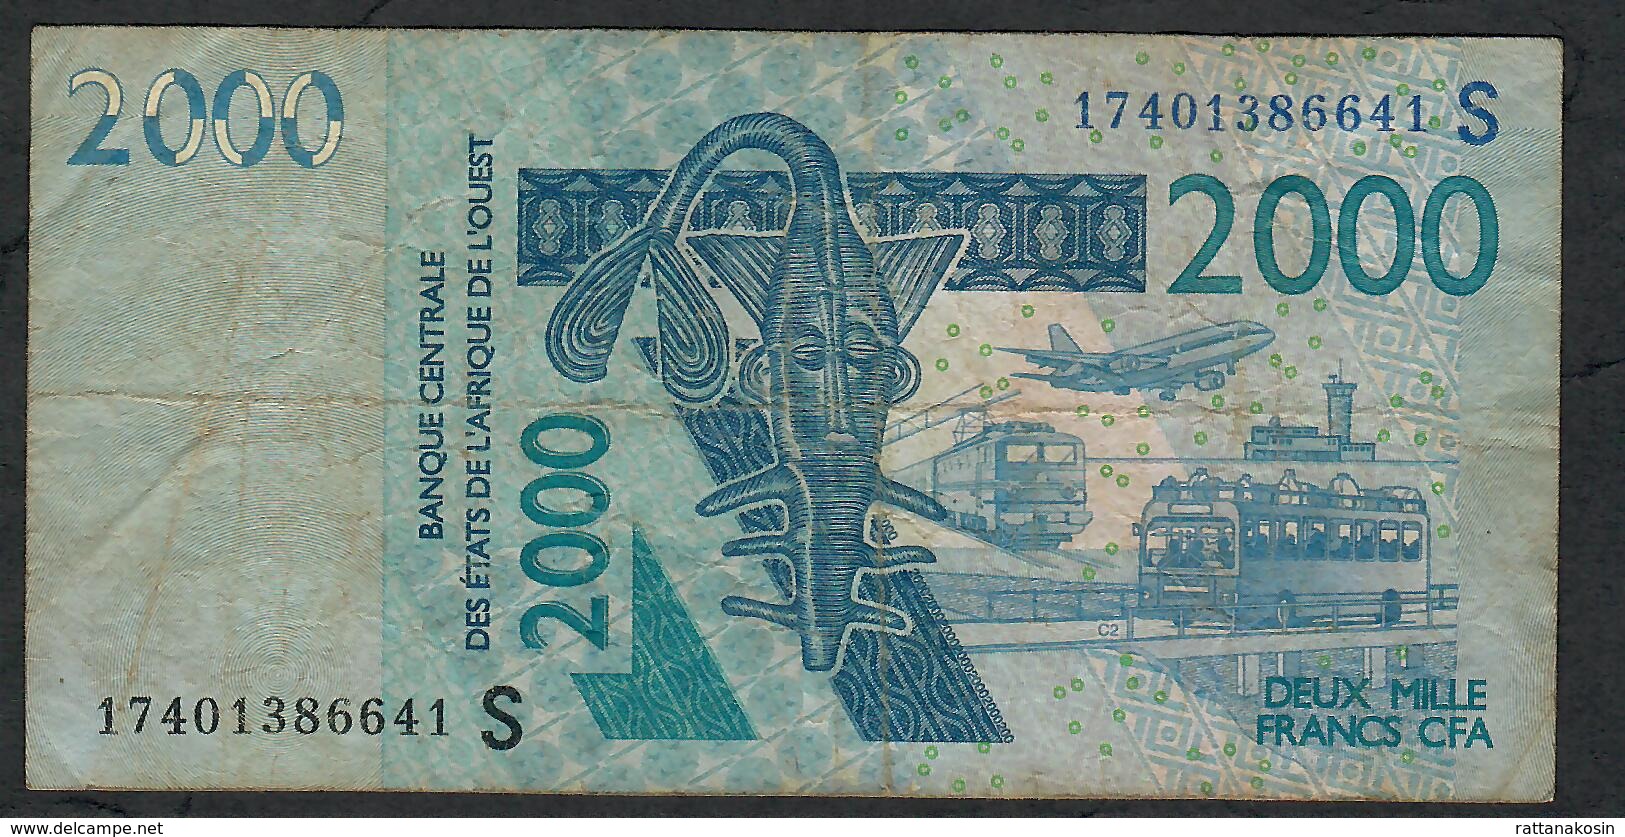 W.A.S. GUINEA BISSAU P916Sq 2000 FRANCS (20)17 2017 F-VF NO P.h. ! - Stati Dell'Africa Occidentale